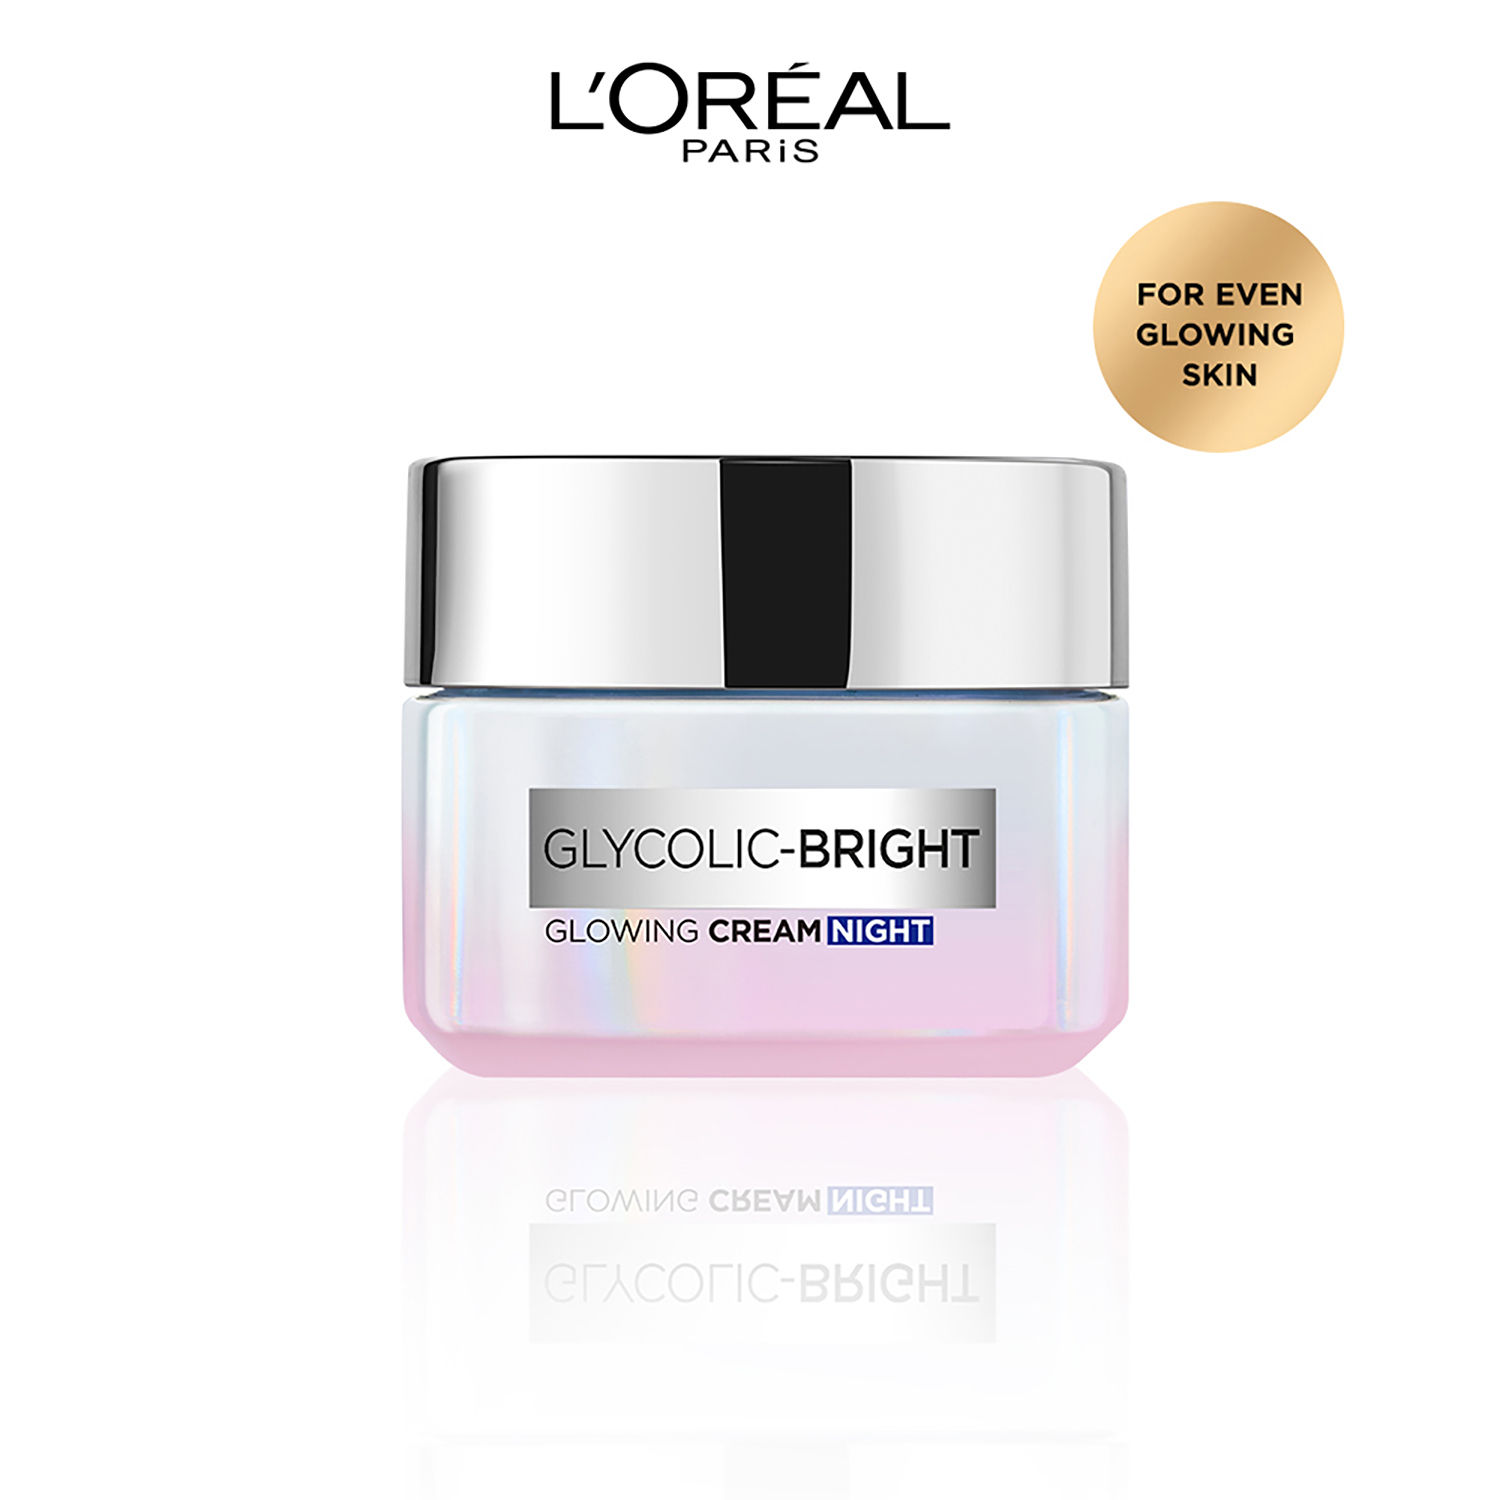 Buy L'Oreal Paris Glycolic Bright Glowing Night Cream, 50ml | Overnight Cream with Glycolic Acid for Dark Spot Removal & Glowing Skin - Purplle